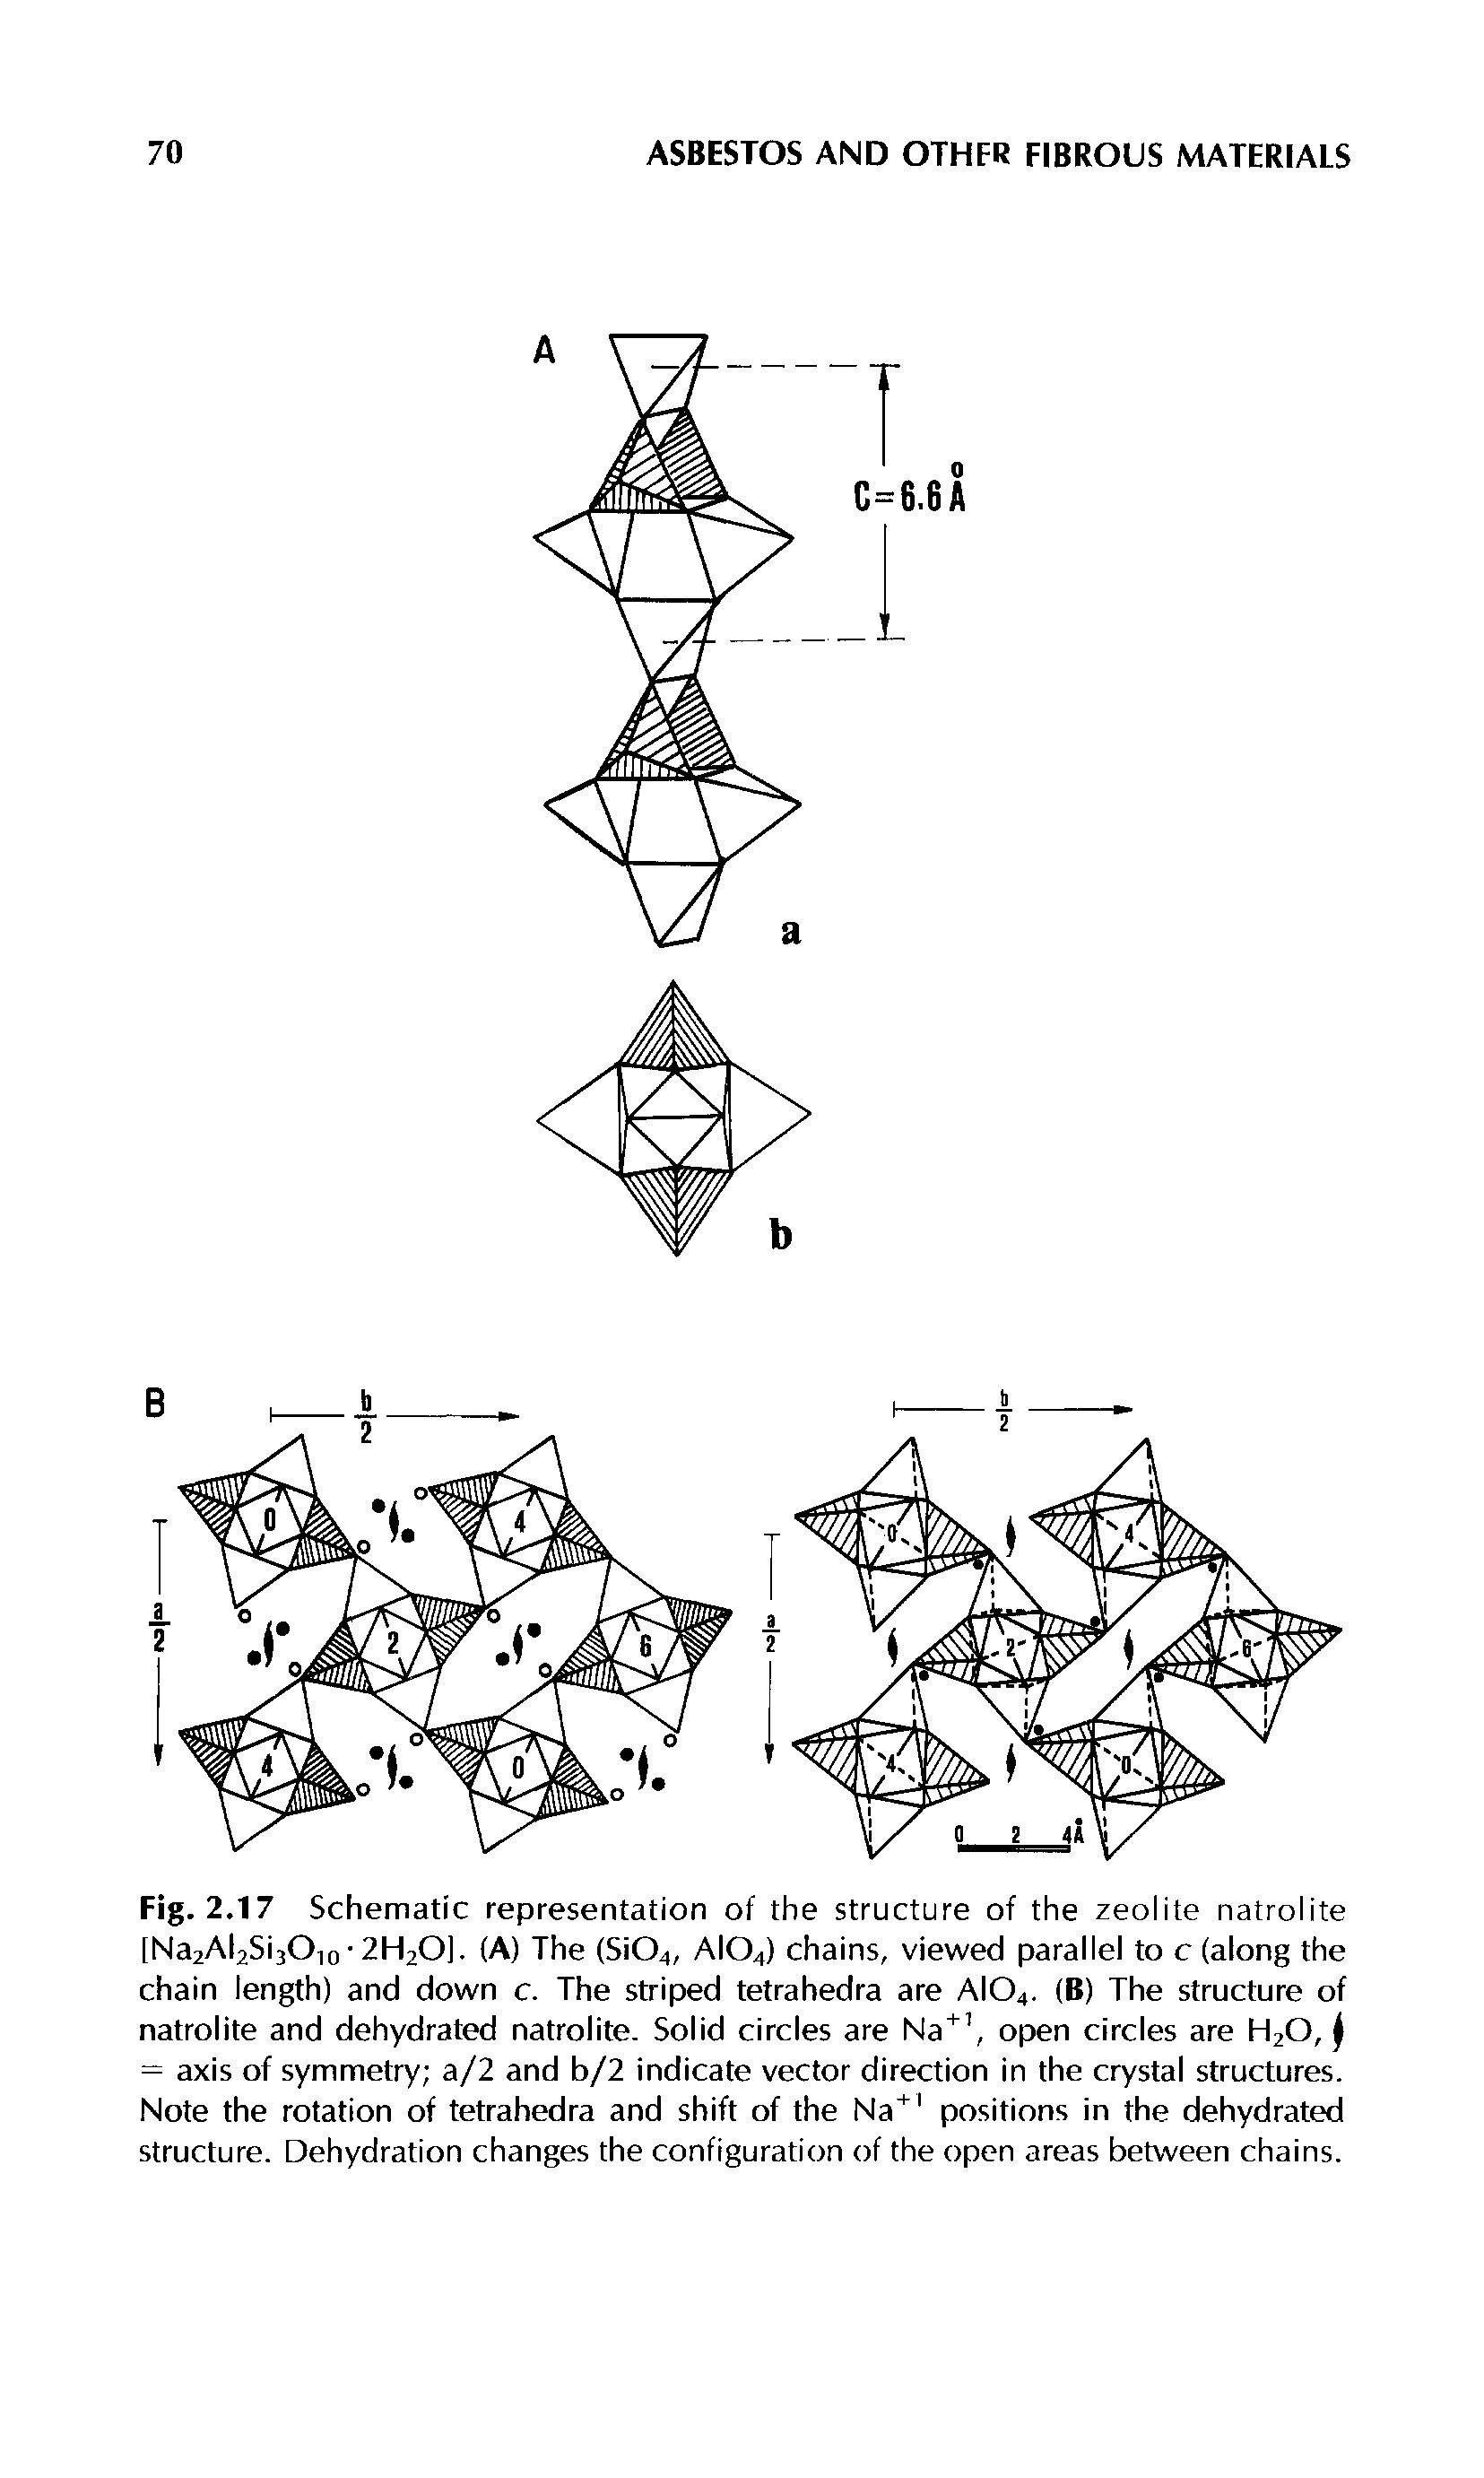 Fig. 2.17 Schematic representation of the structure of the zeolite natrolite [Na2Al2Si30io 2H2OI. (A) The (Si04, AIO4) chains, viewed parallel to c (along the chain length) and down c. The striped tetrahedra are AIO4. (B) The structure of natrolite and dehydrated natrolite. Solid circles are Na" , open circles are H2O, = axis of symmetry a/2 and b/2 indicate vector direction in the crystal structures. Note the rotation of tetrahedra and shift of the Na" positions in the dehydrated structure. Dehydration changes the configuration of the open areas between chains.